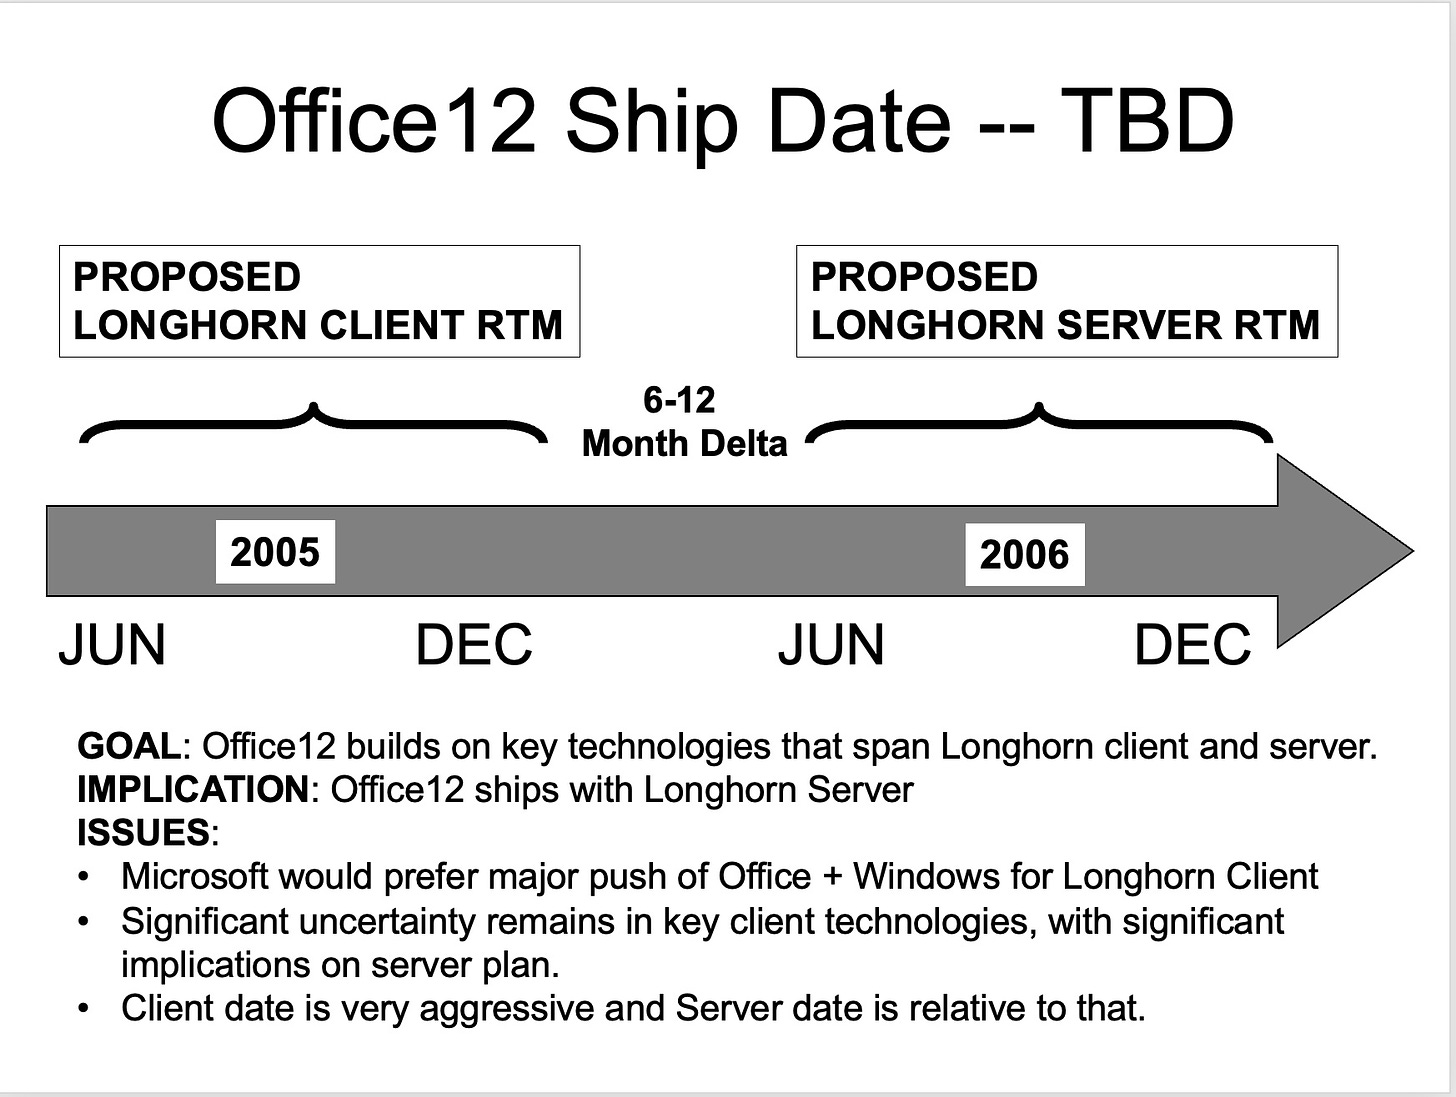 Slide with Title 'Office12 Ship Date' showing the Longhorn proposed client from June-Dec 2005 range for release then a 6-12 months delta and then Longhorn server between June and dec of 2006.